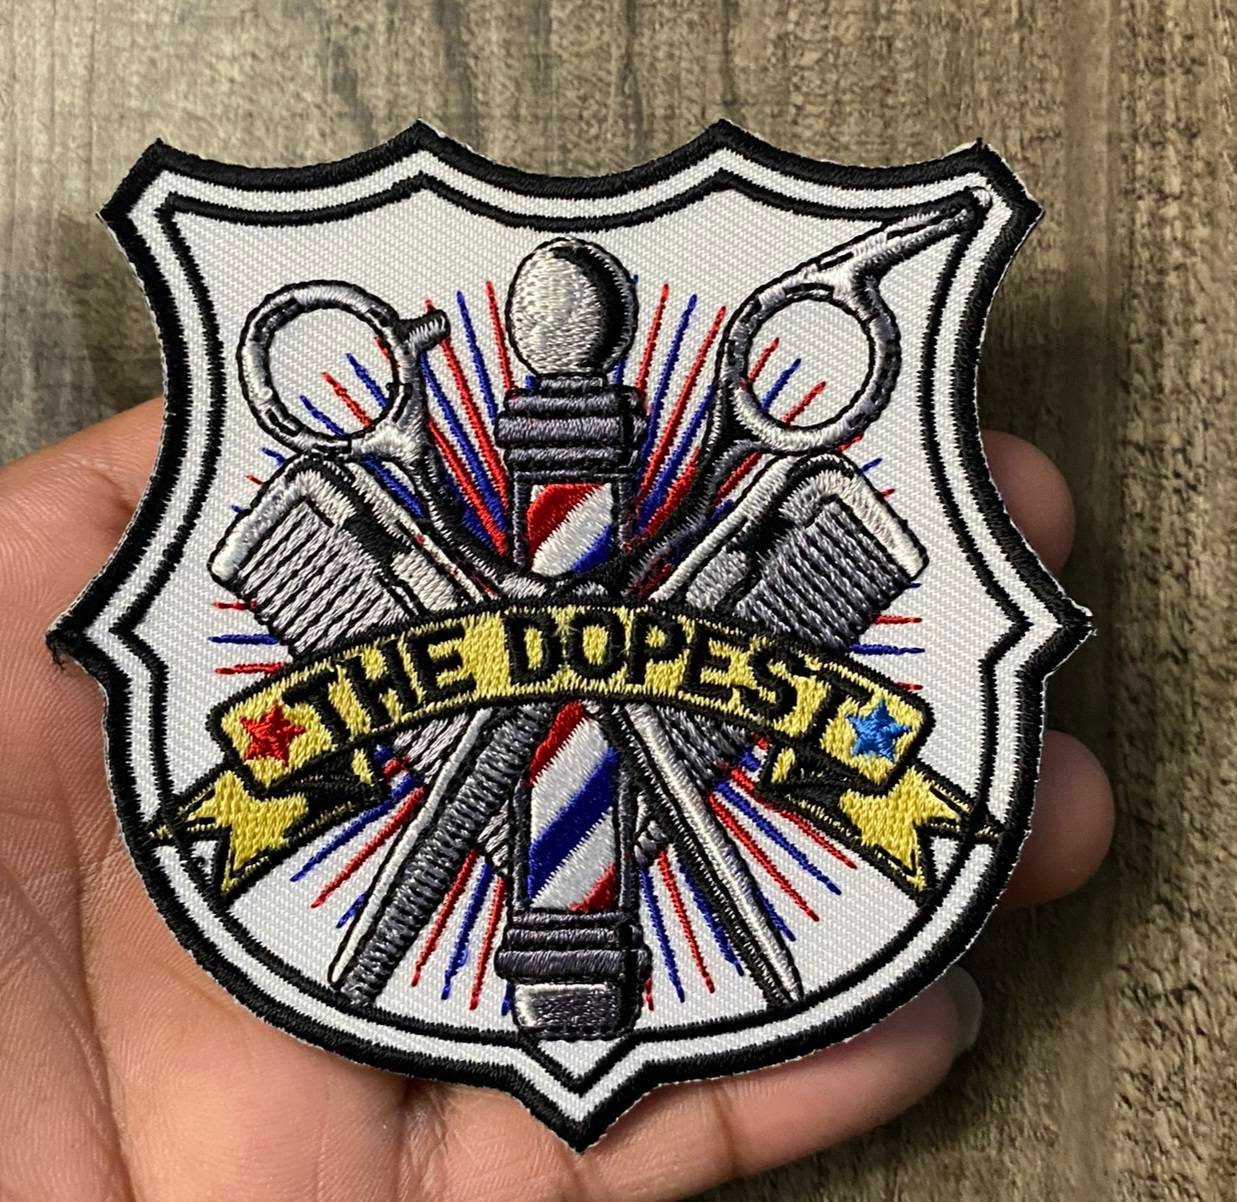 NEW, "The DOPEST Barber" Barbershop Badge, 1 Pc., Iron-on Merit Badge, Embroidered, DIY Appliques, Great for Men and Women Barbers, 4"